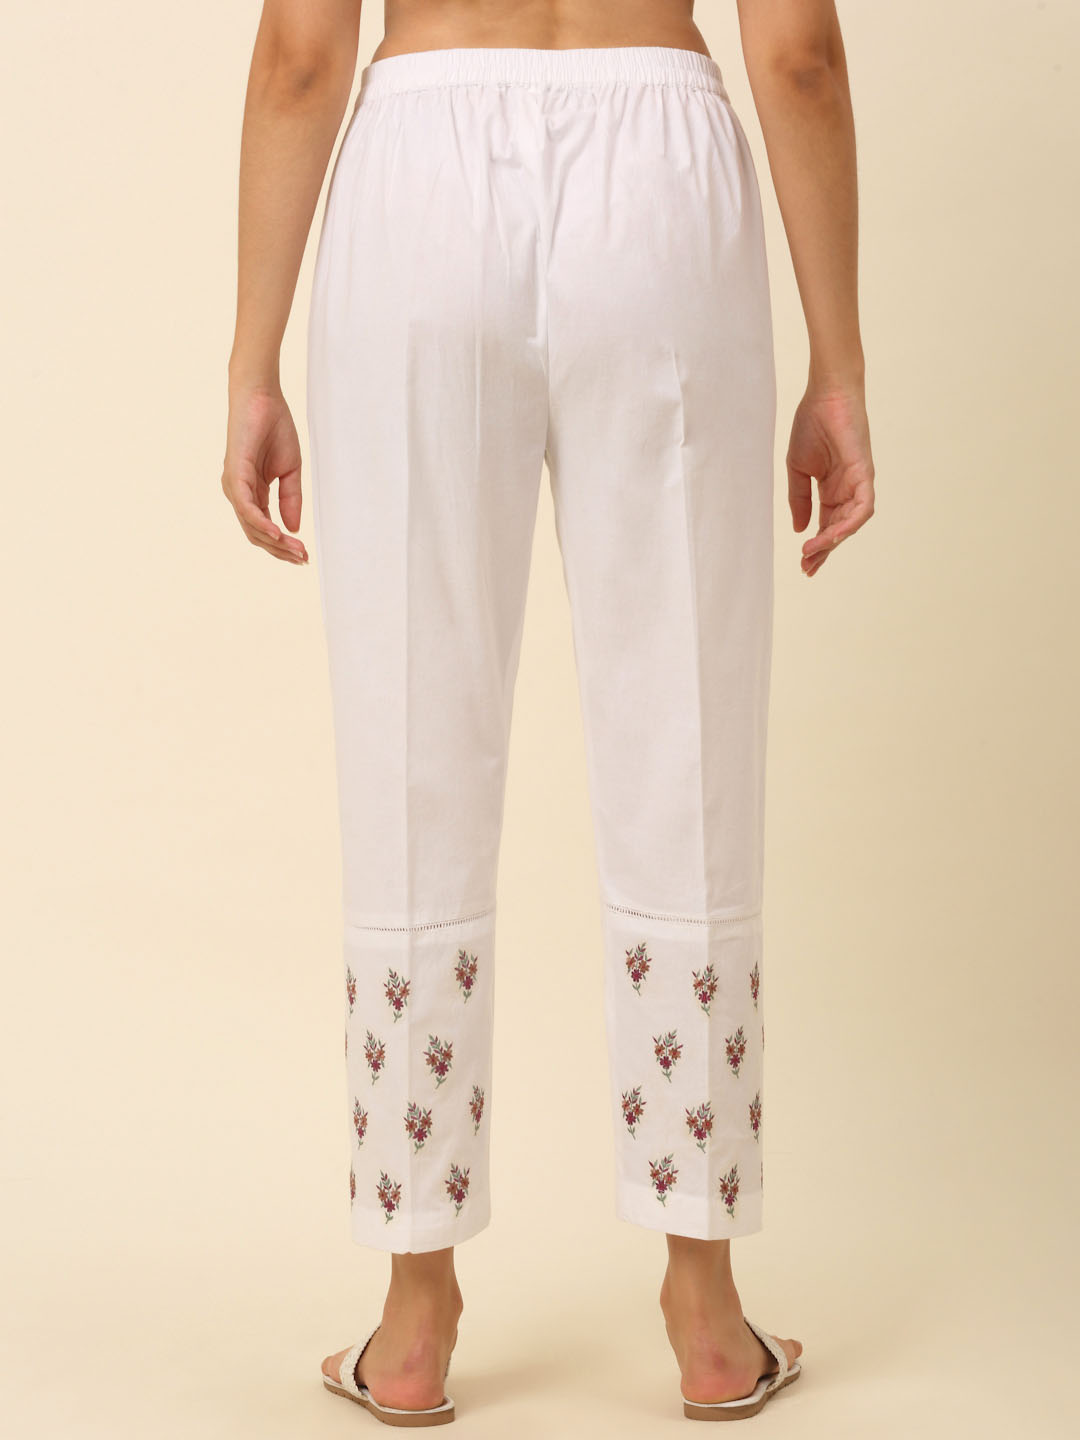 White Embroidered Hem Palazzo with Beeding lace details